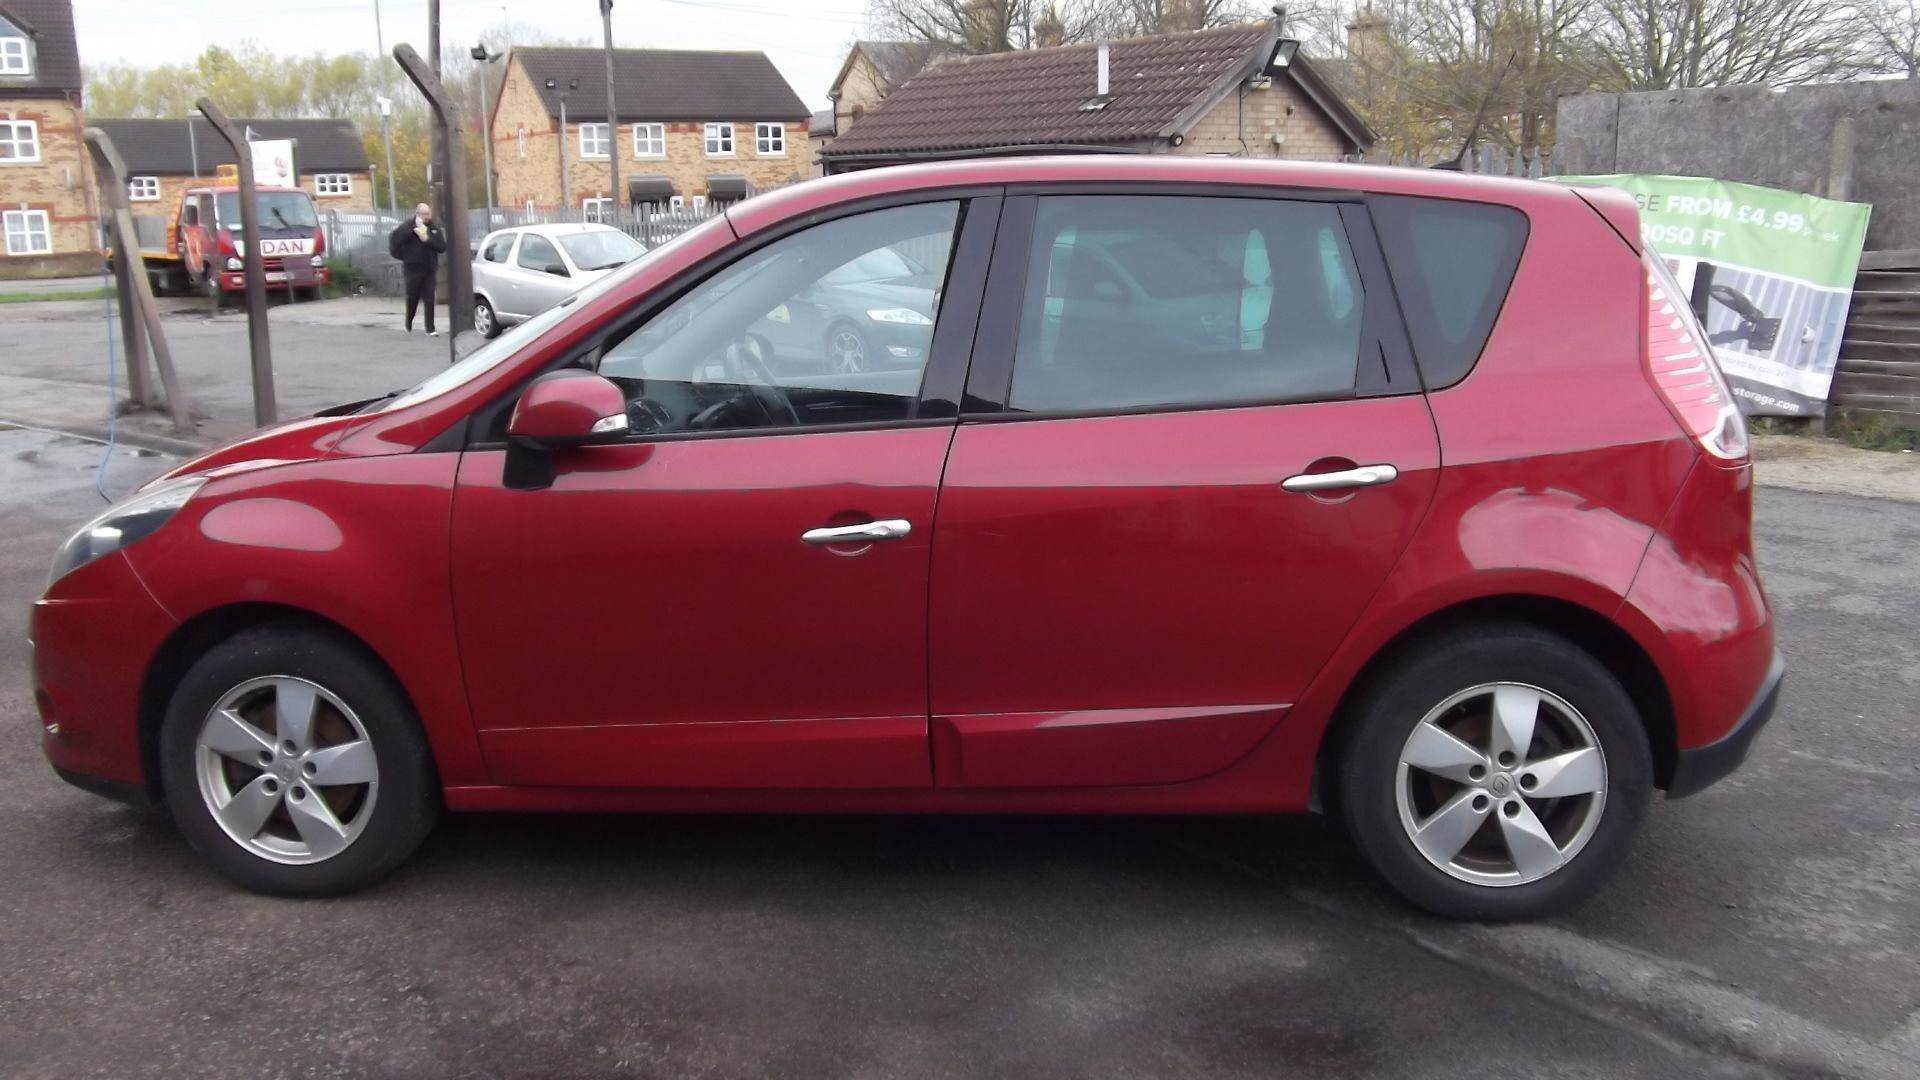 2011 Renault Scenic 1.5 DCI Dynamique Tom Tom 5 Door MPV - Image 15 of 17